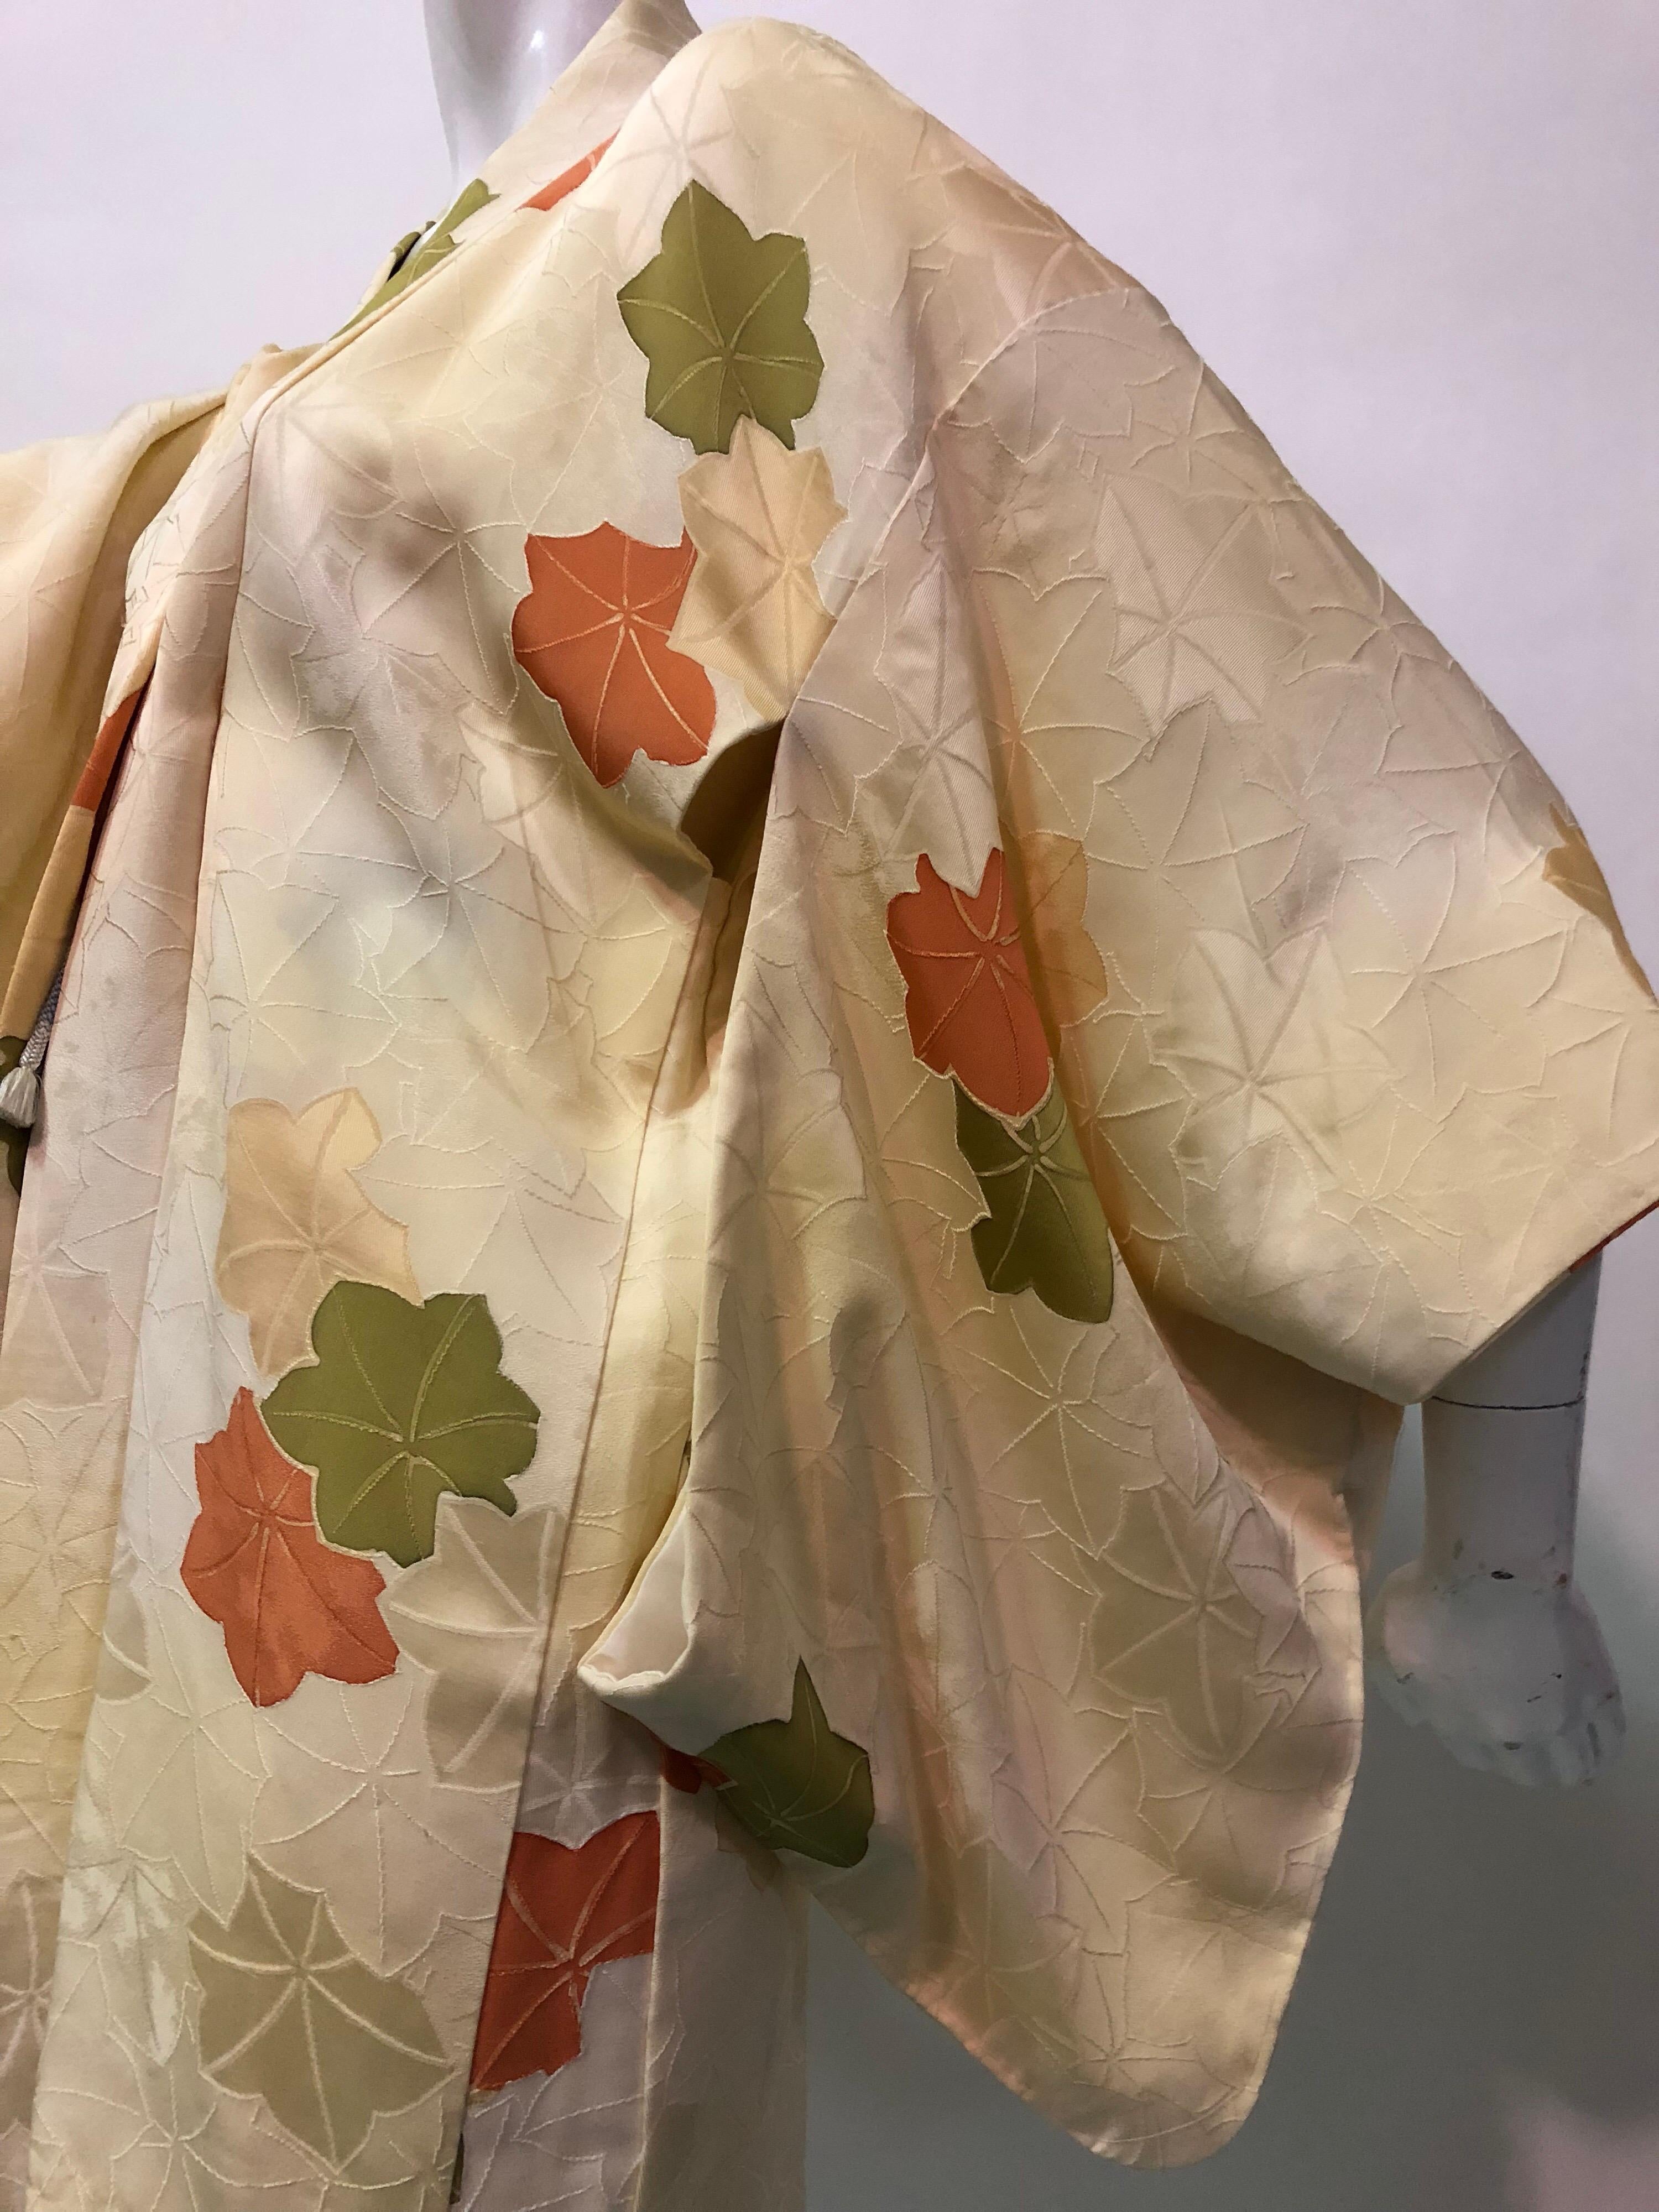 A wonderful vintage Japanese silk print kimono in a heavy cream silk with olive and rust floral pattern throughout . Traditional kimono-cut style with dramatic sleeves and front tie closure. 
Wonderful condition and great for lounging at home with